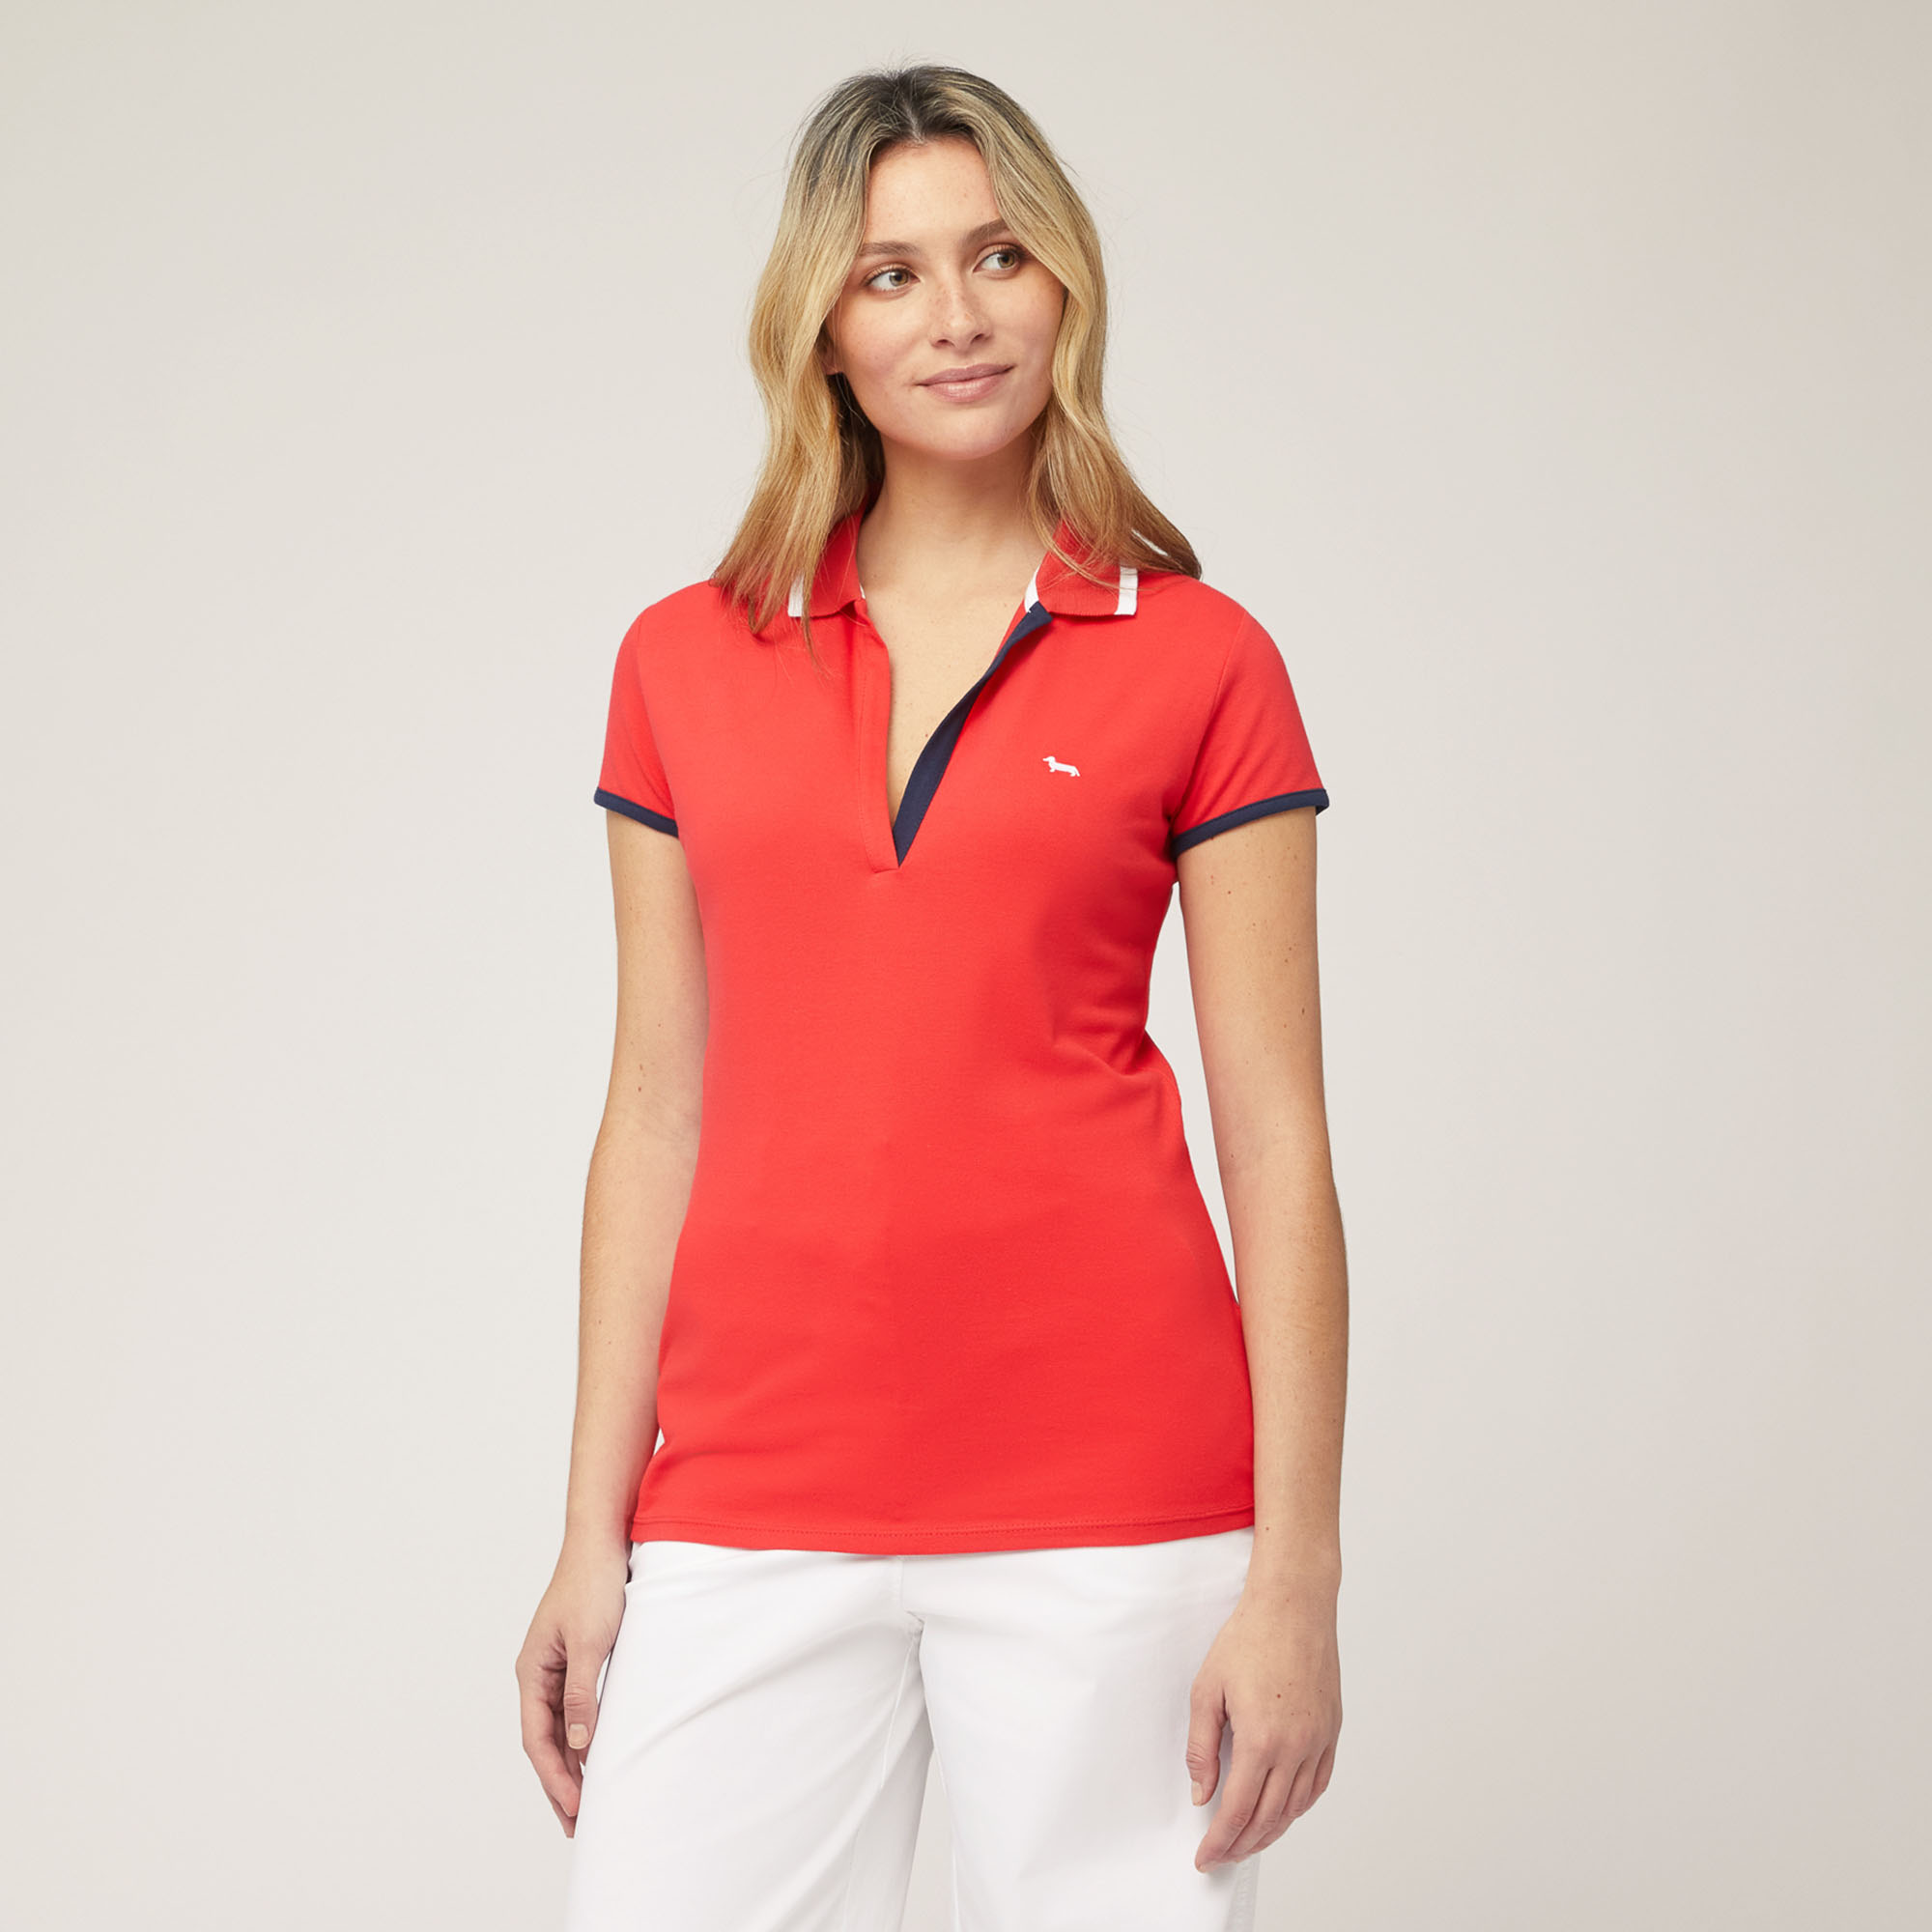 Buttonless Polo, Light Red, large